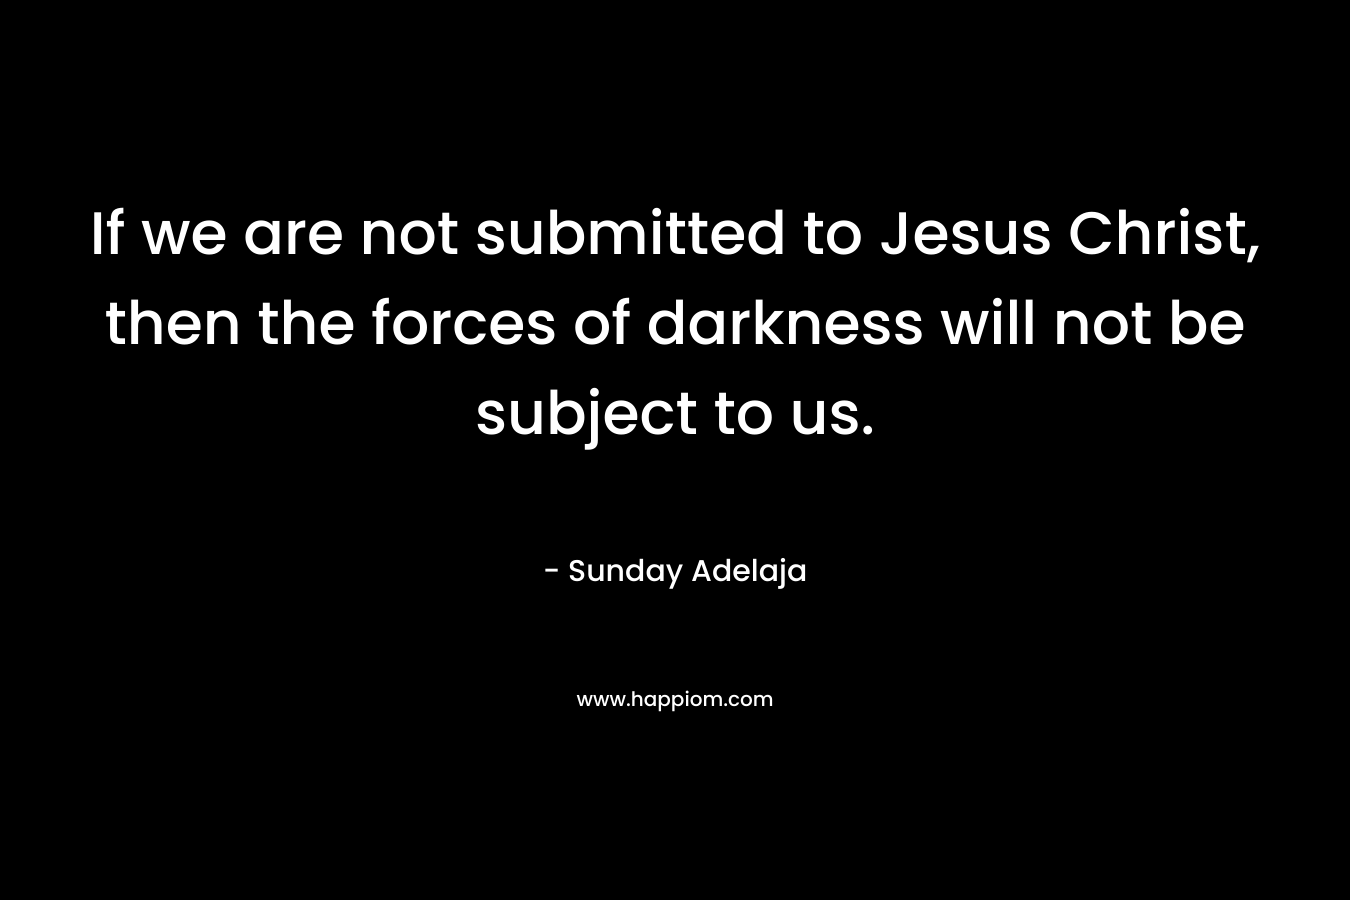 If we are not submitted to Jesus Christ, then the forces of darkness will not be subject to us.